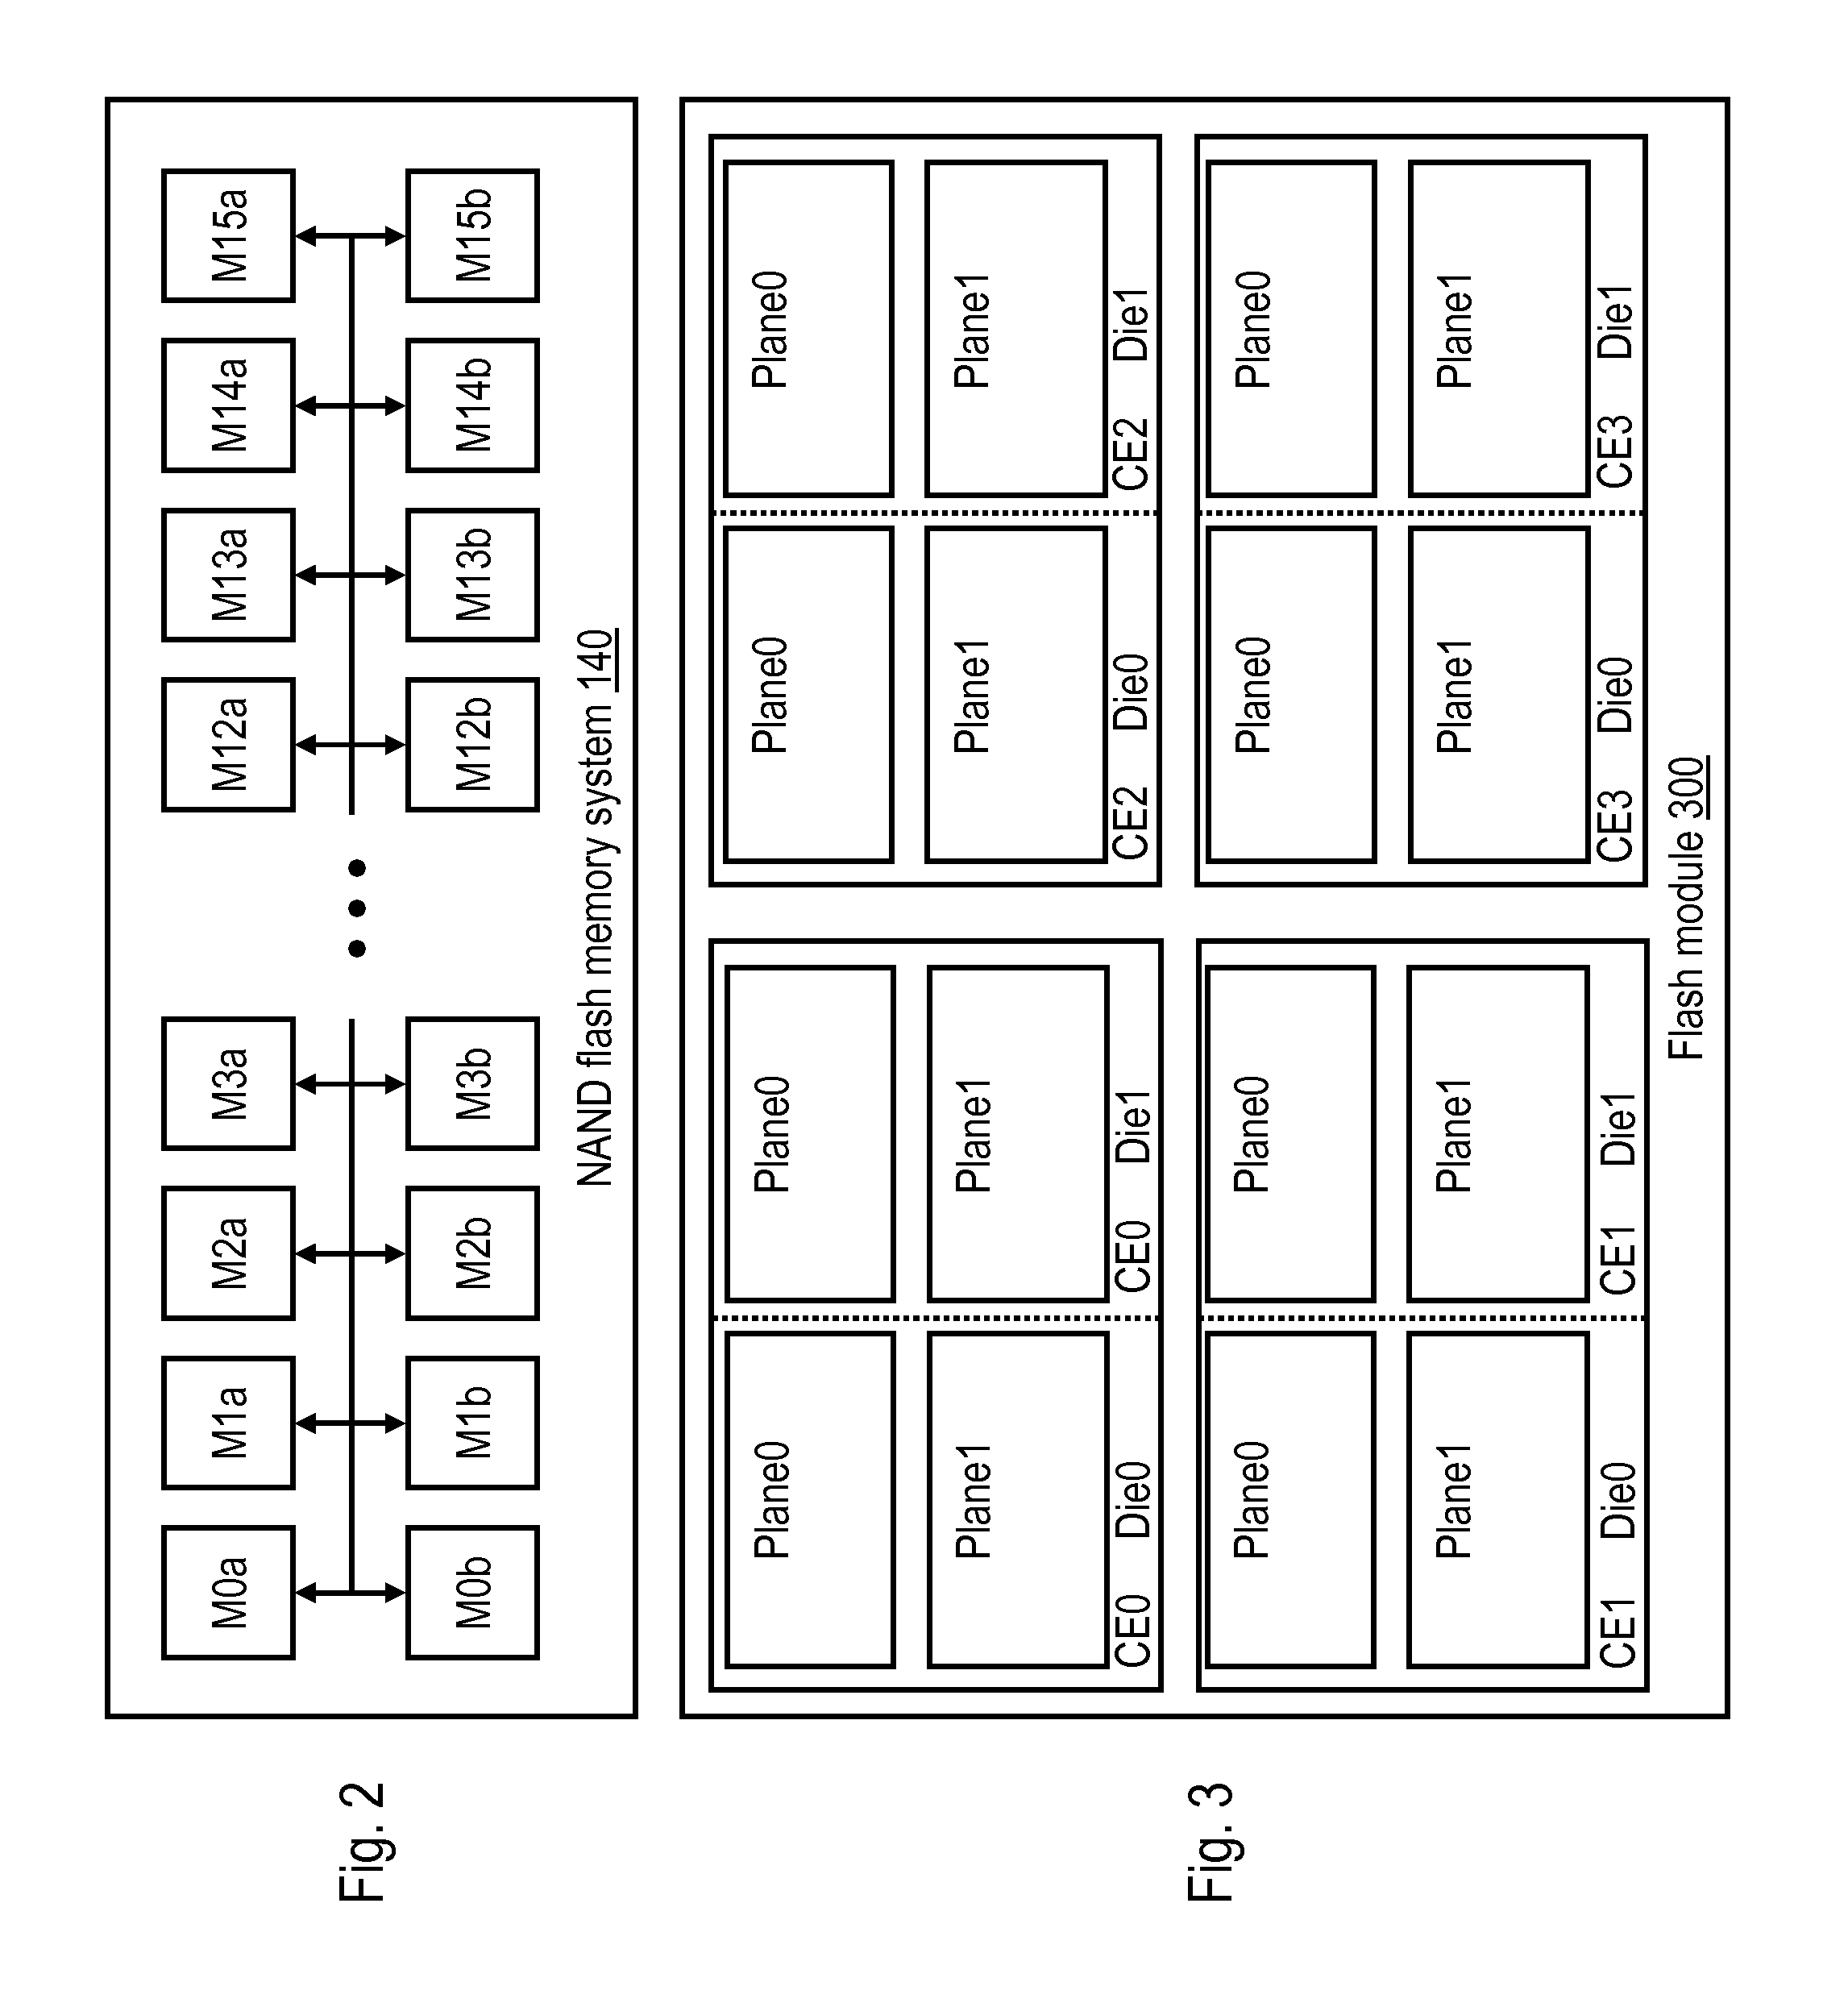 Programming non-volatile memory using a relaxed dwell time